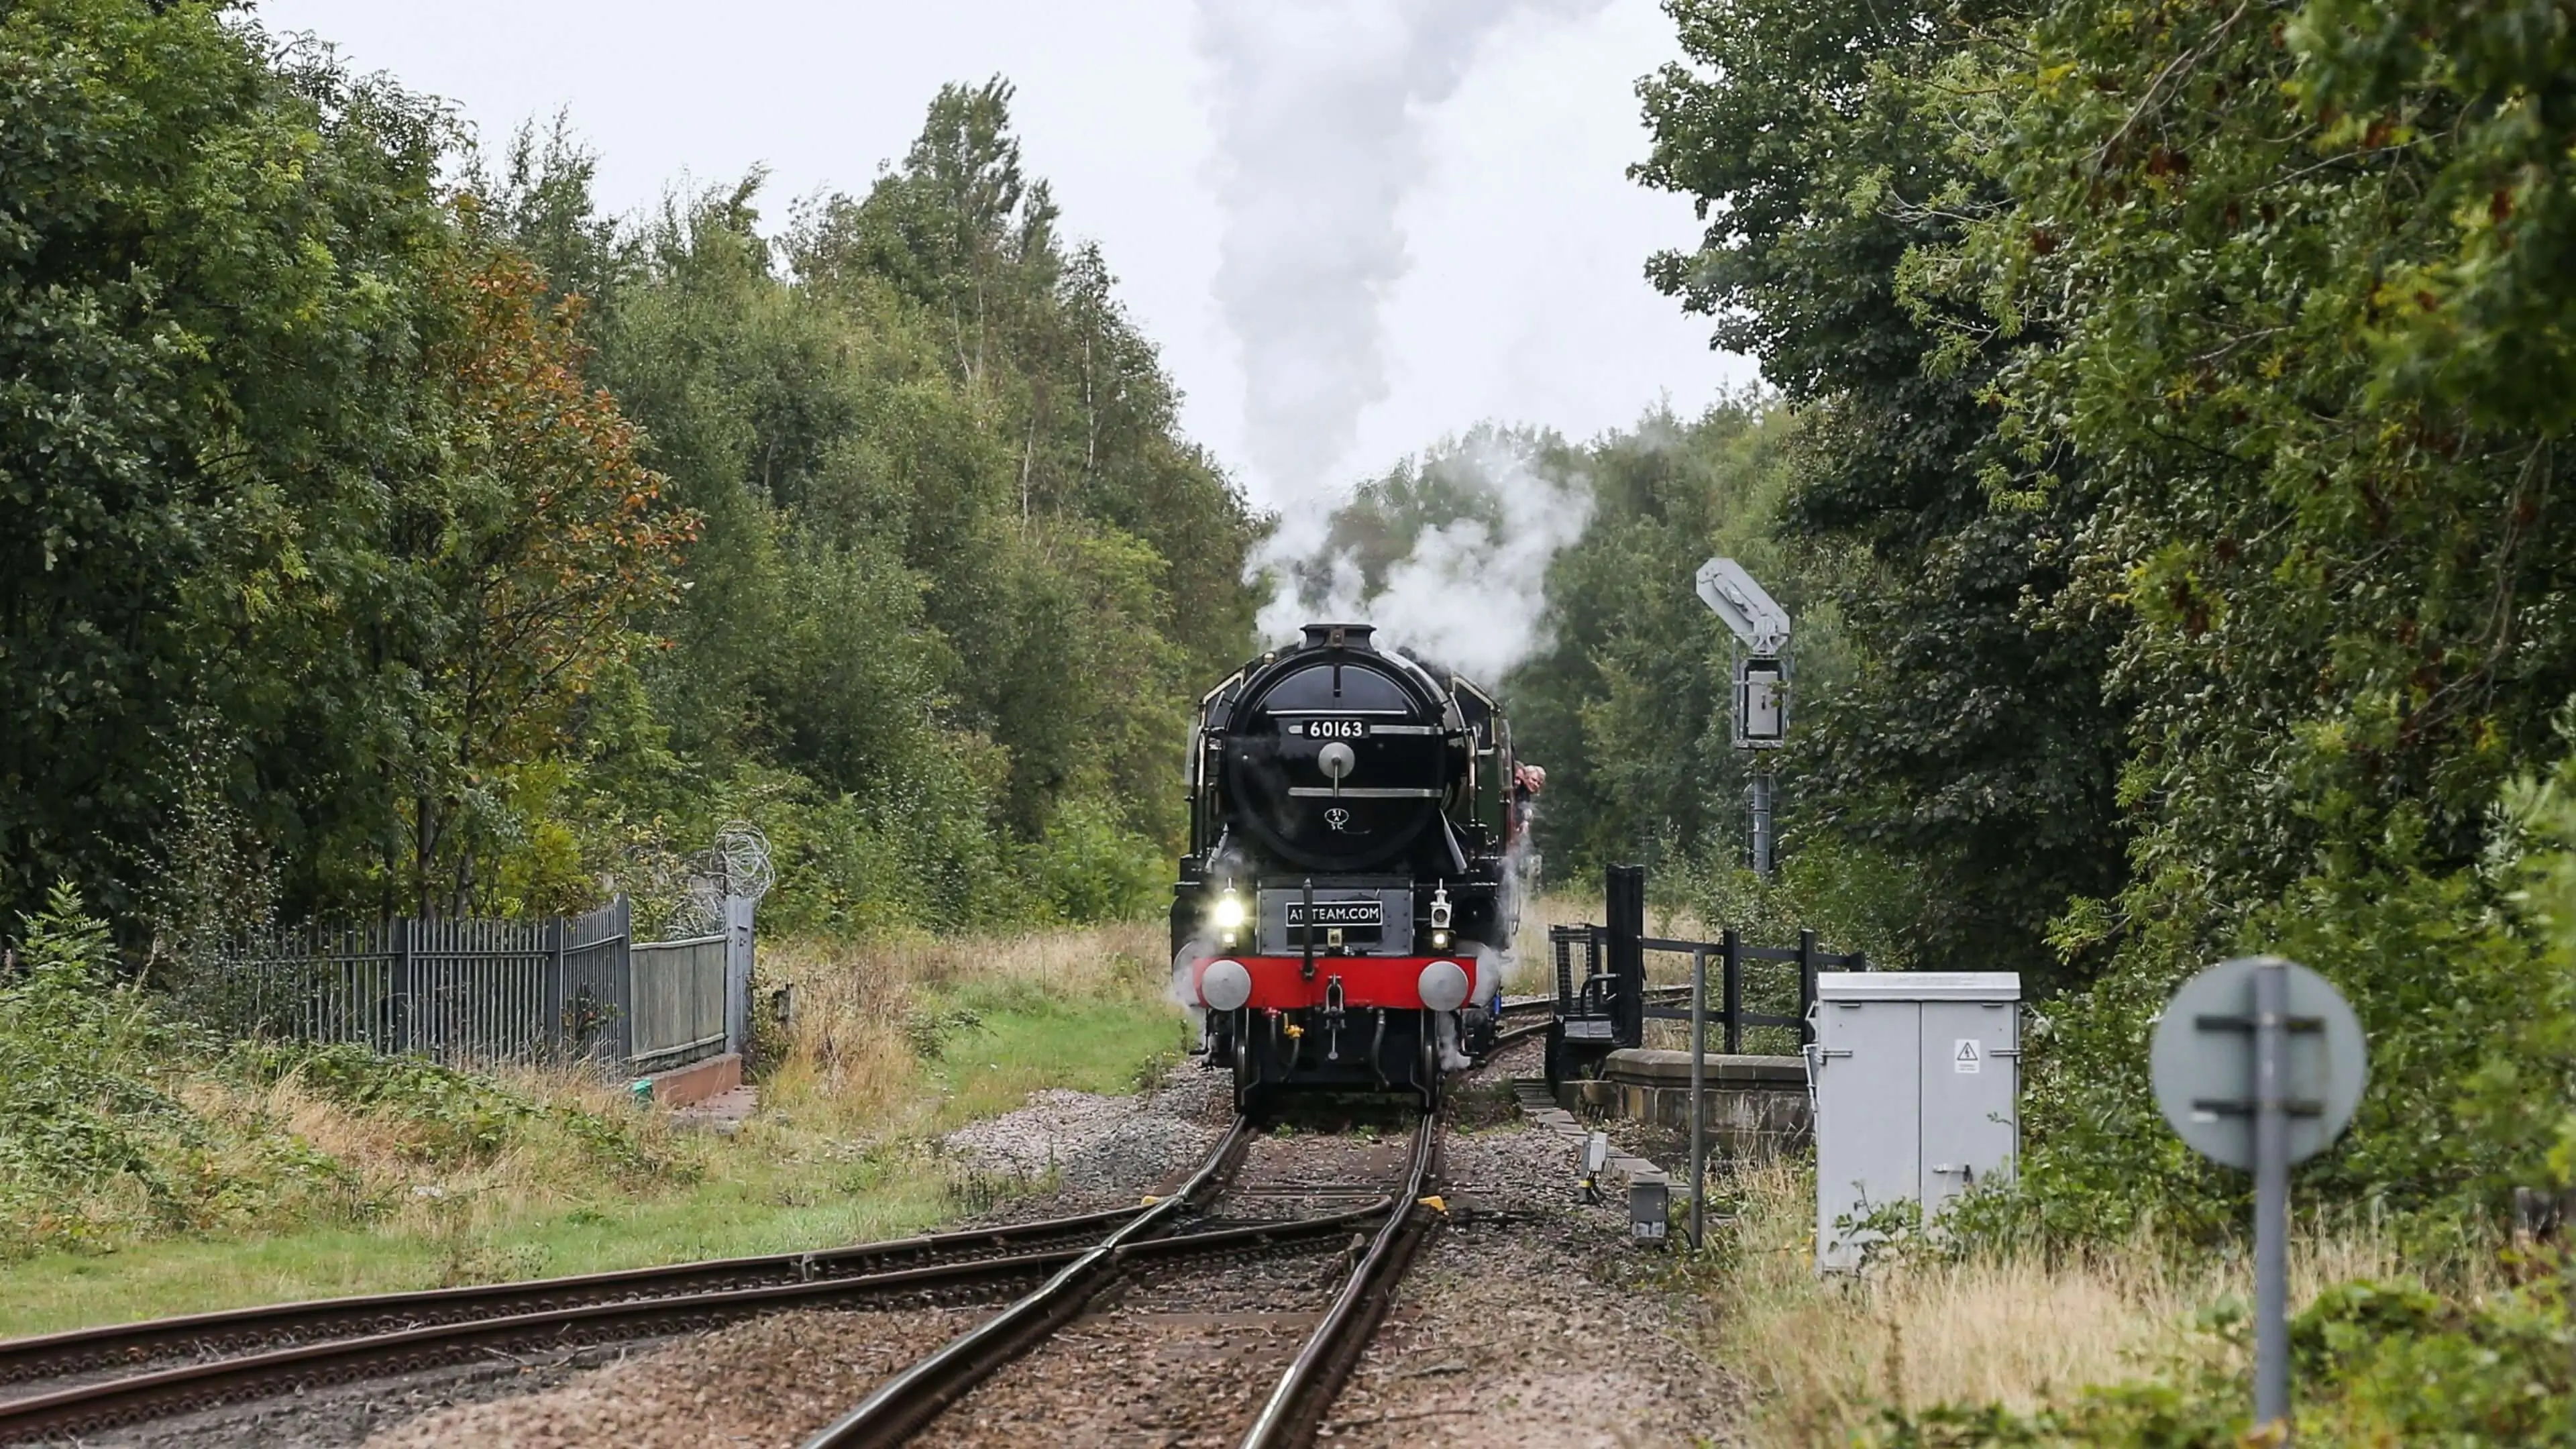 The locomotive 'Tornado' under steam approaching North Road Station